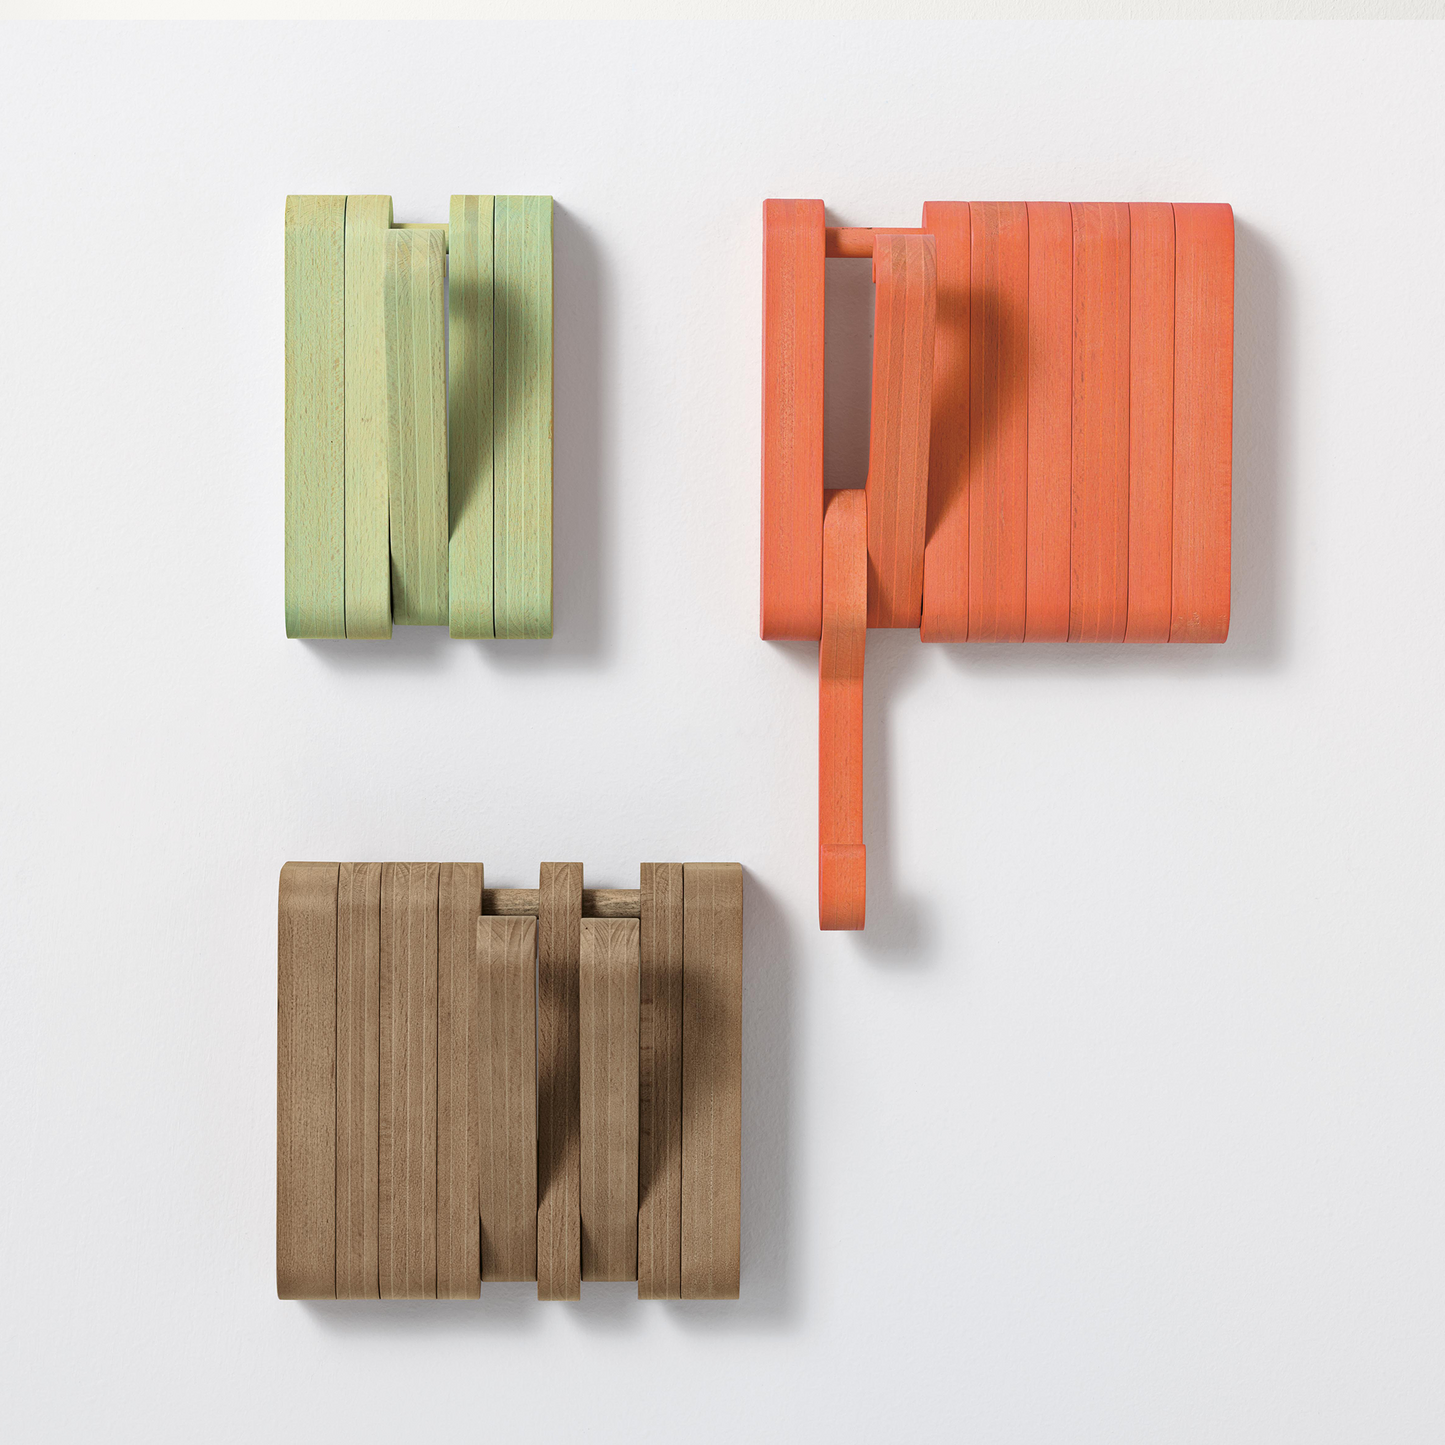 Wooden wall hooks open and closed.